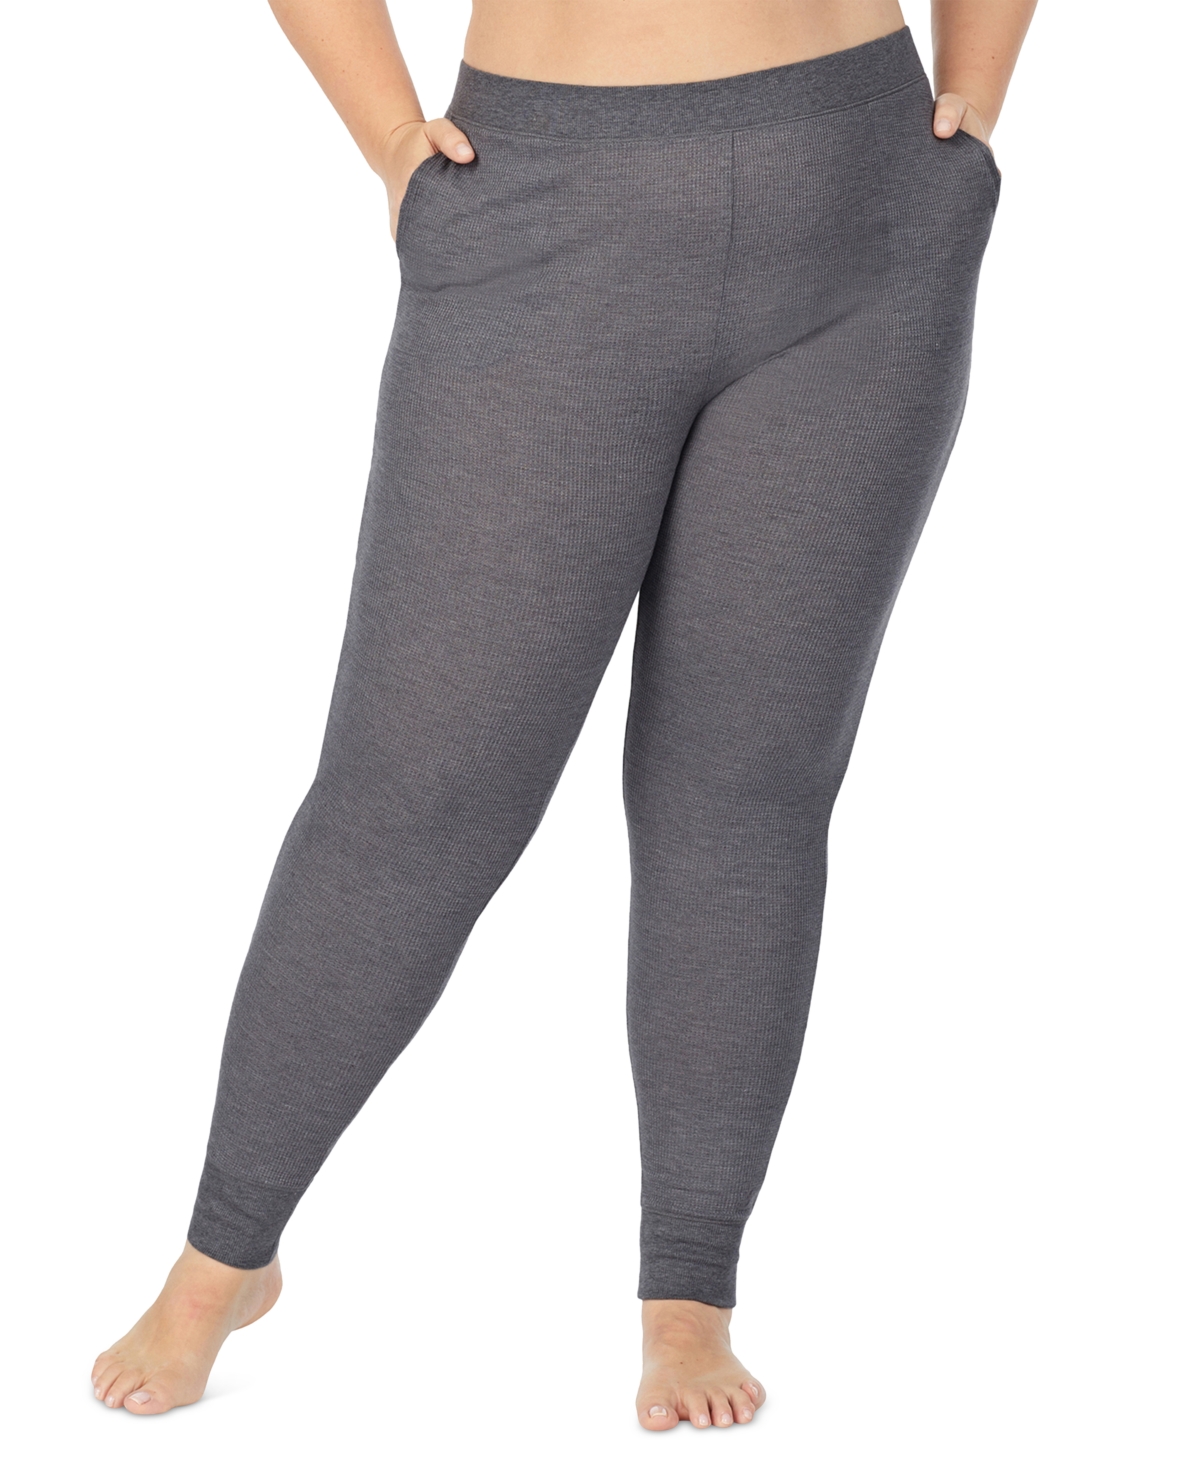 Plus Size Stretch Thermal Mid-Rise Leggings - Stone Grey Heather